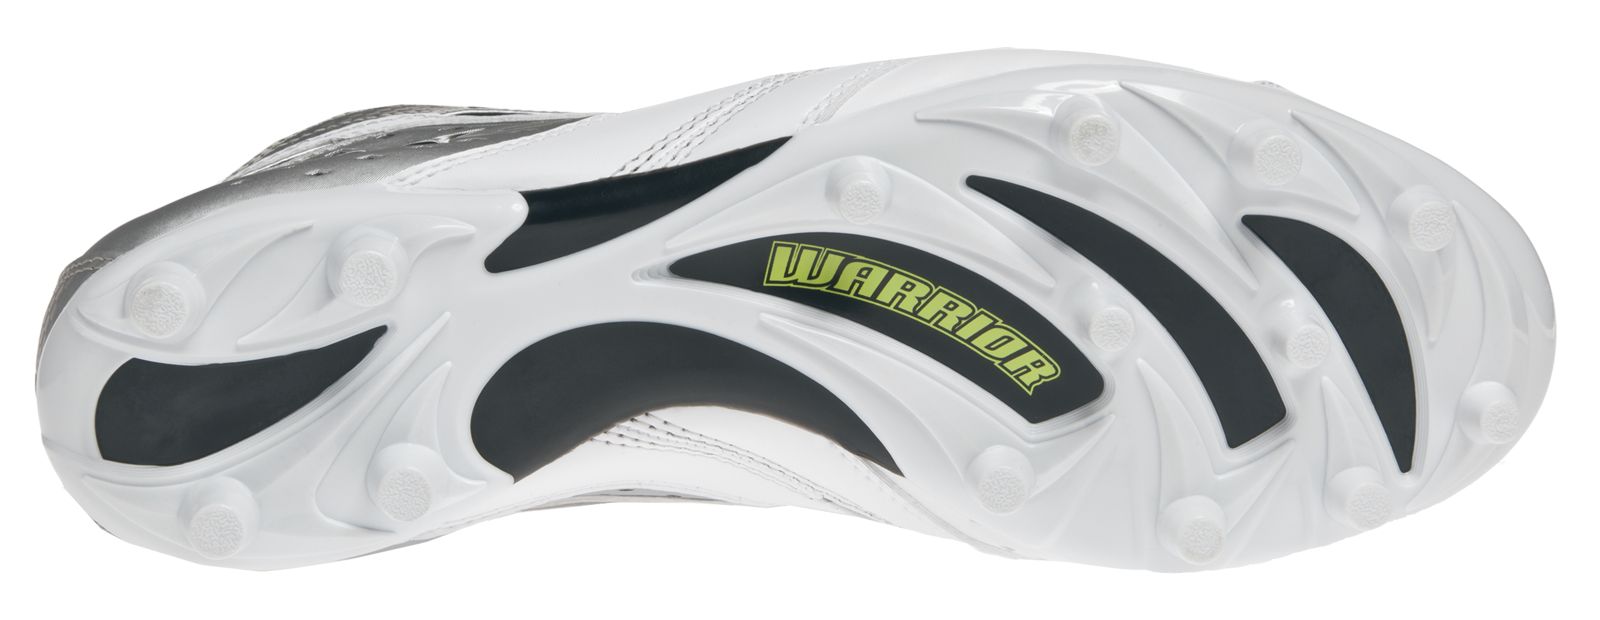 Burn 2nd Degree Cleat, White with Black & Silver image number 5